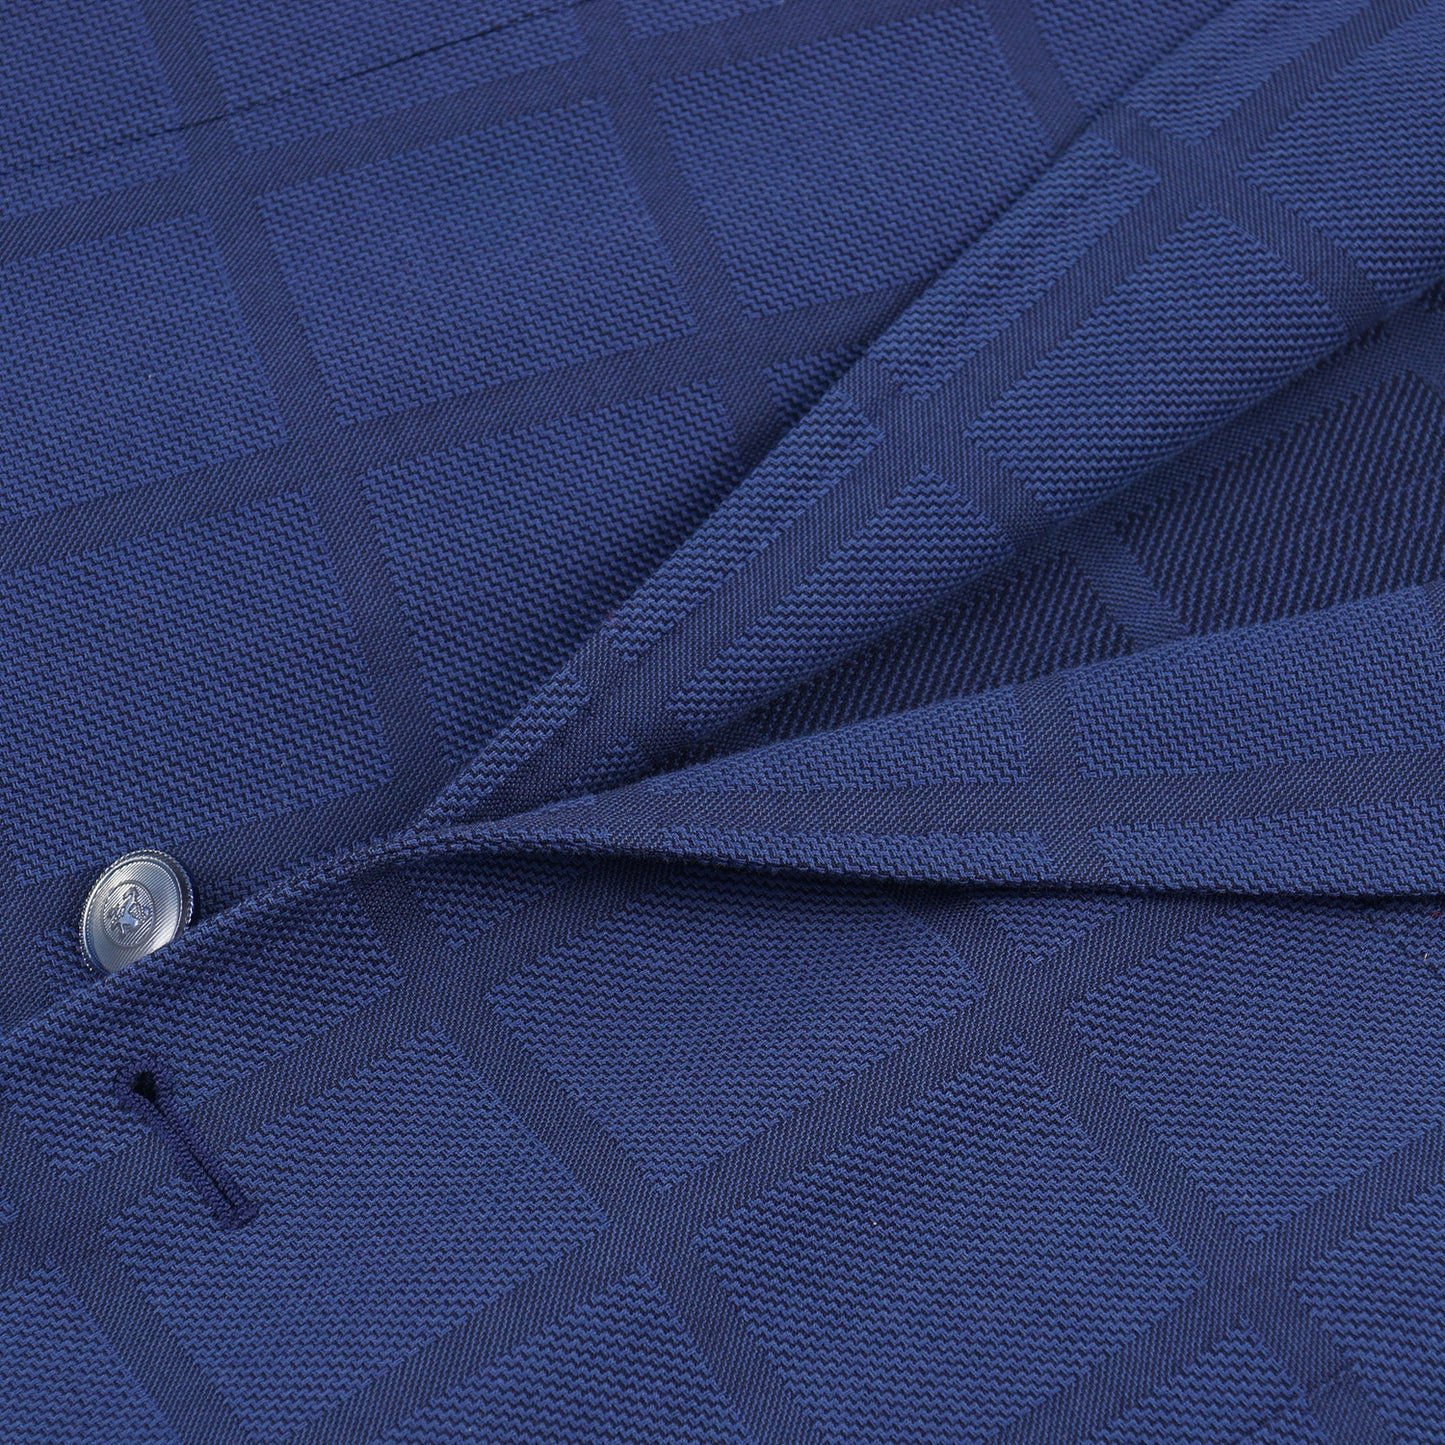 Zilli Slim-Fit Woven Wool and Cotton Sport Coat - Top Shelf Apparel